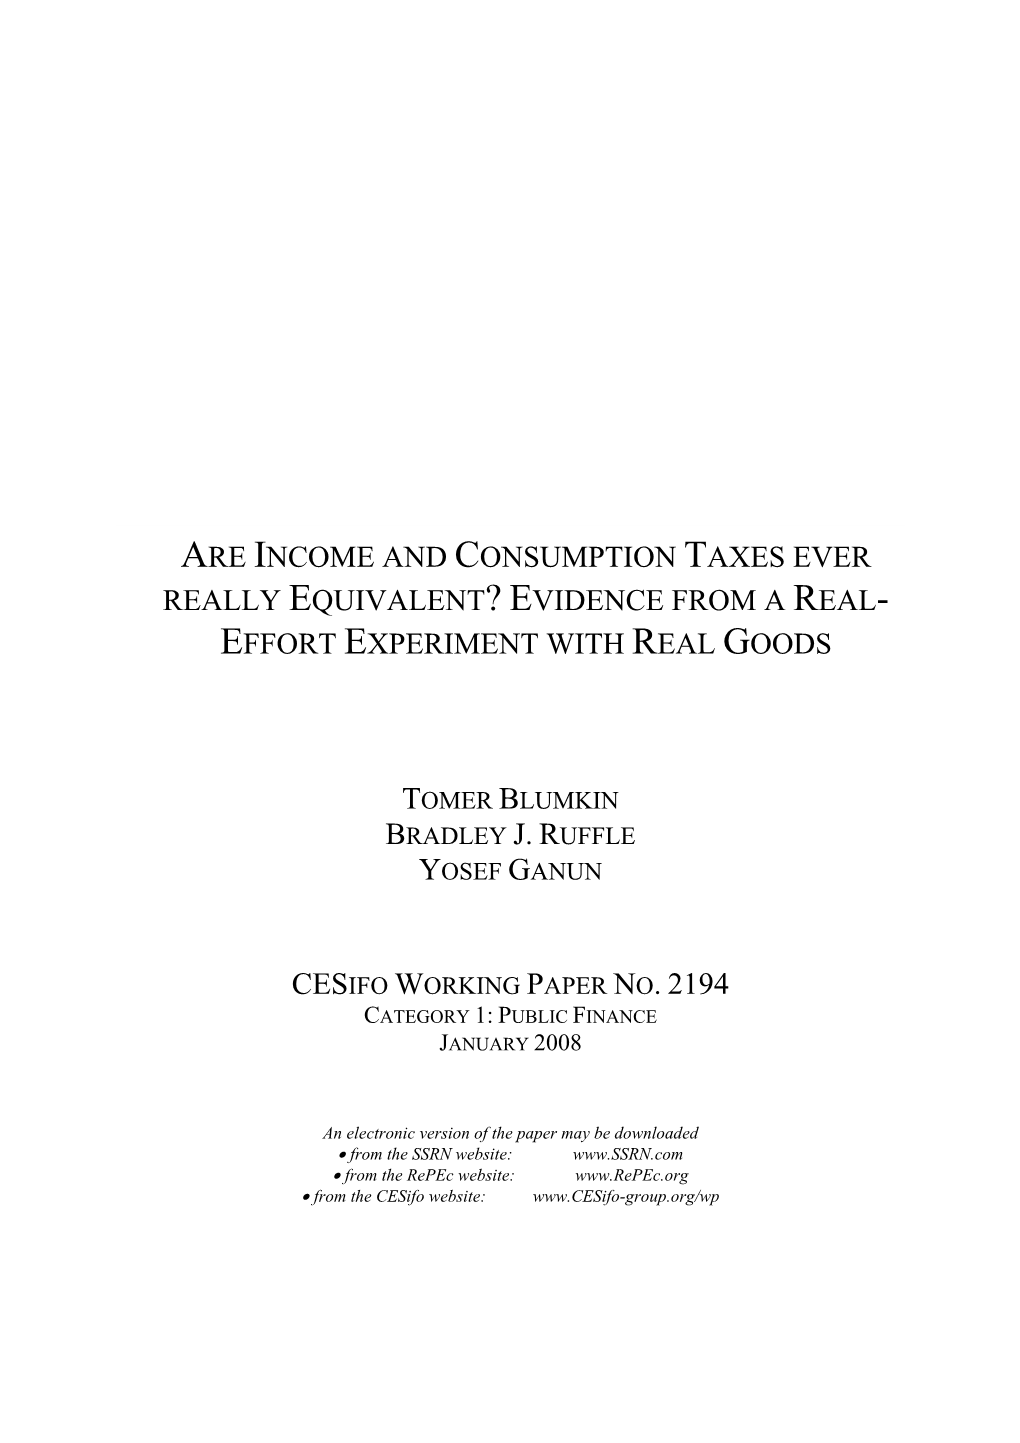 Are Income and Consumption Taxes Ever Really Equivalent? Evidence from a Real- Effort Experiment with Real Goods